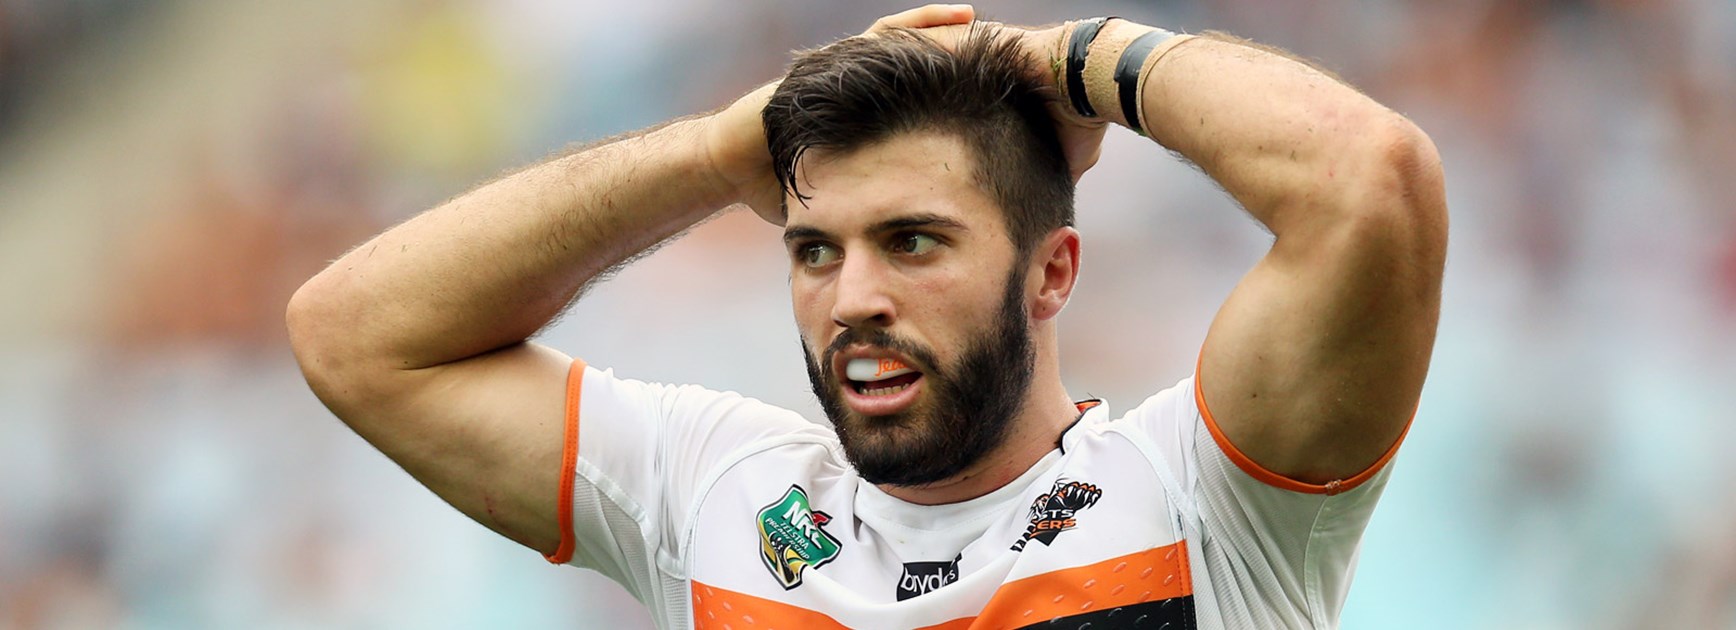 Wests Tigers fullback James Tedesco was a shining light for the club in 2015.